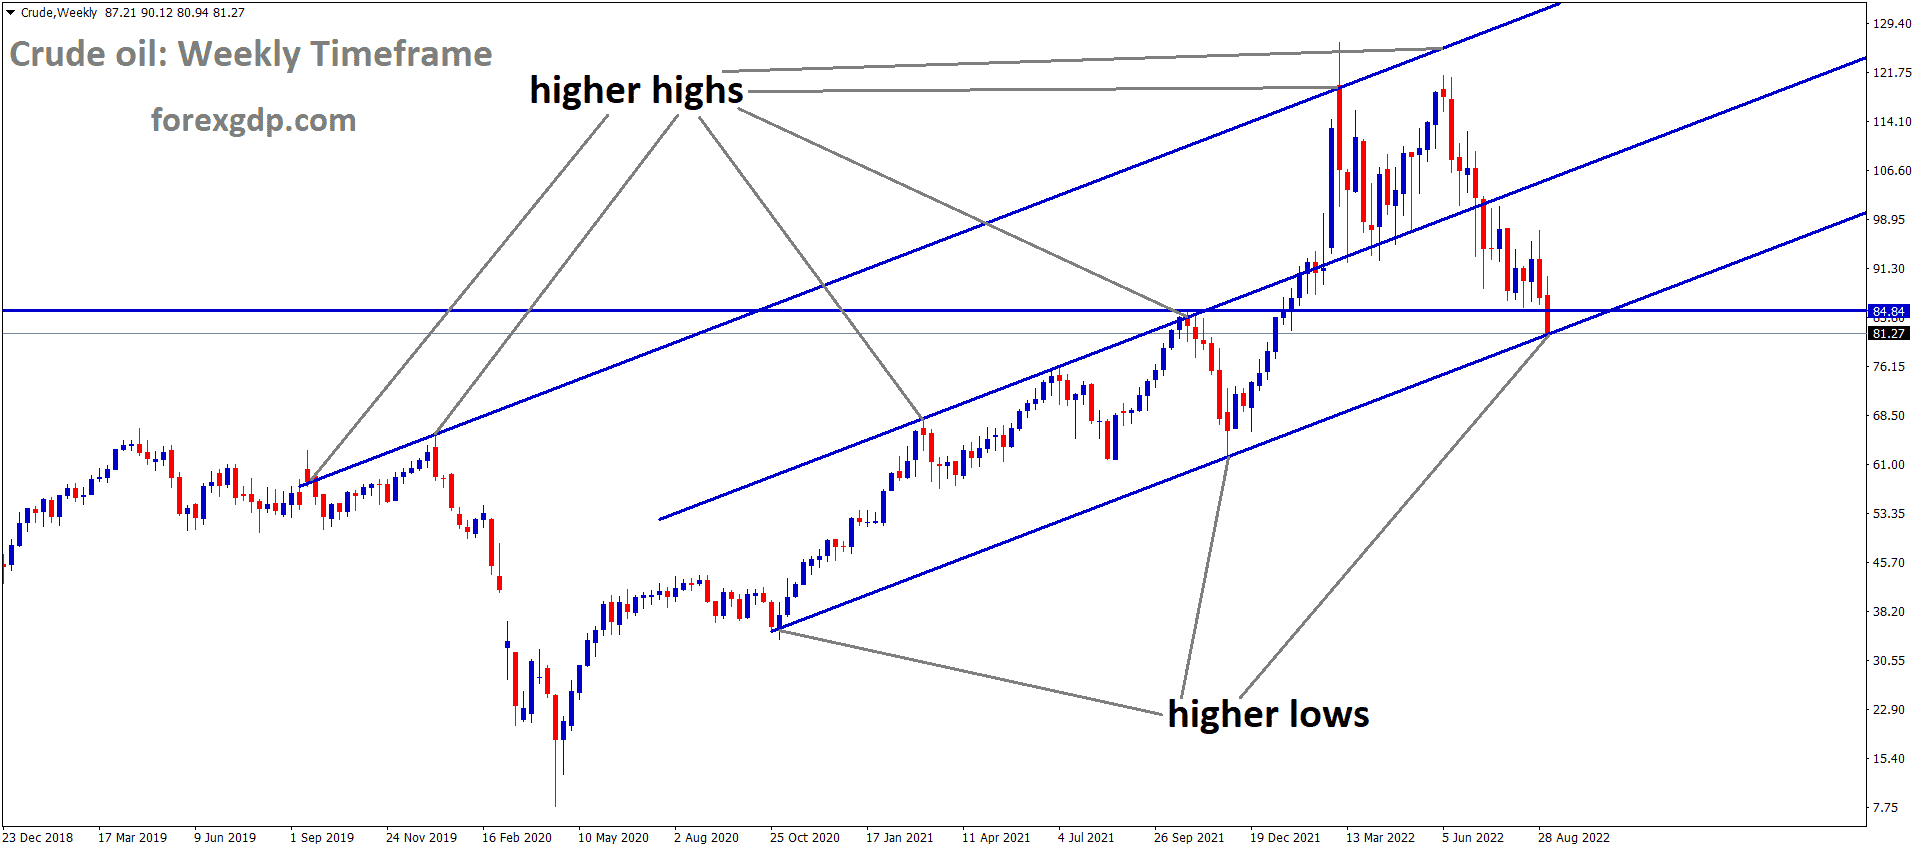 Crude Oil is moving in an Ascending channel and the market has reached the higher low area of the channel.